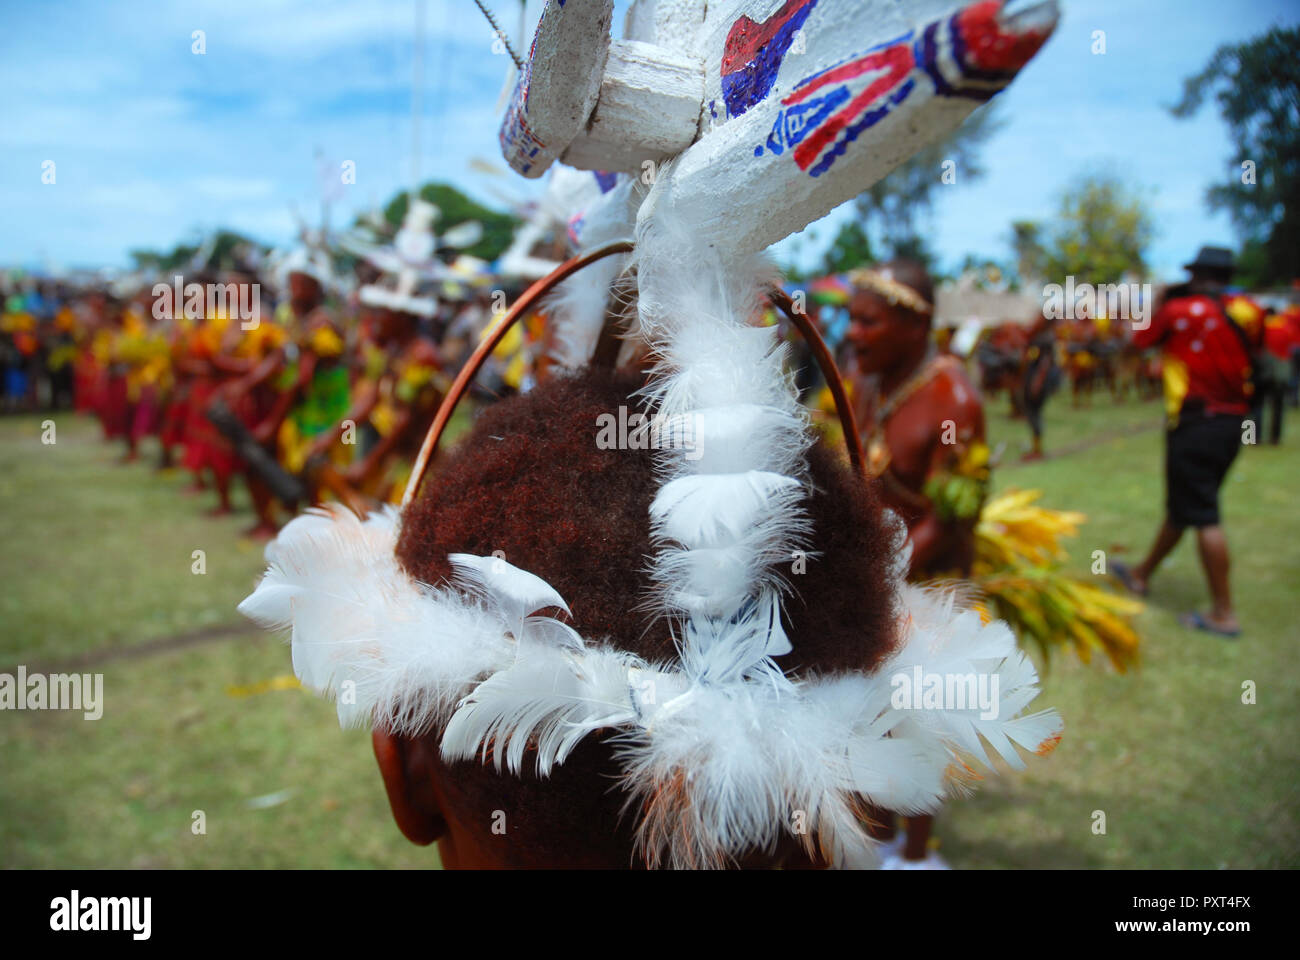 Colourfully dressed and face painted men with boat hat designs dancing as part of a Sing Sing in Madang, Papua New Guinea. Stock Photo